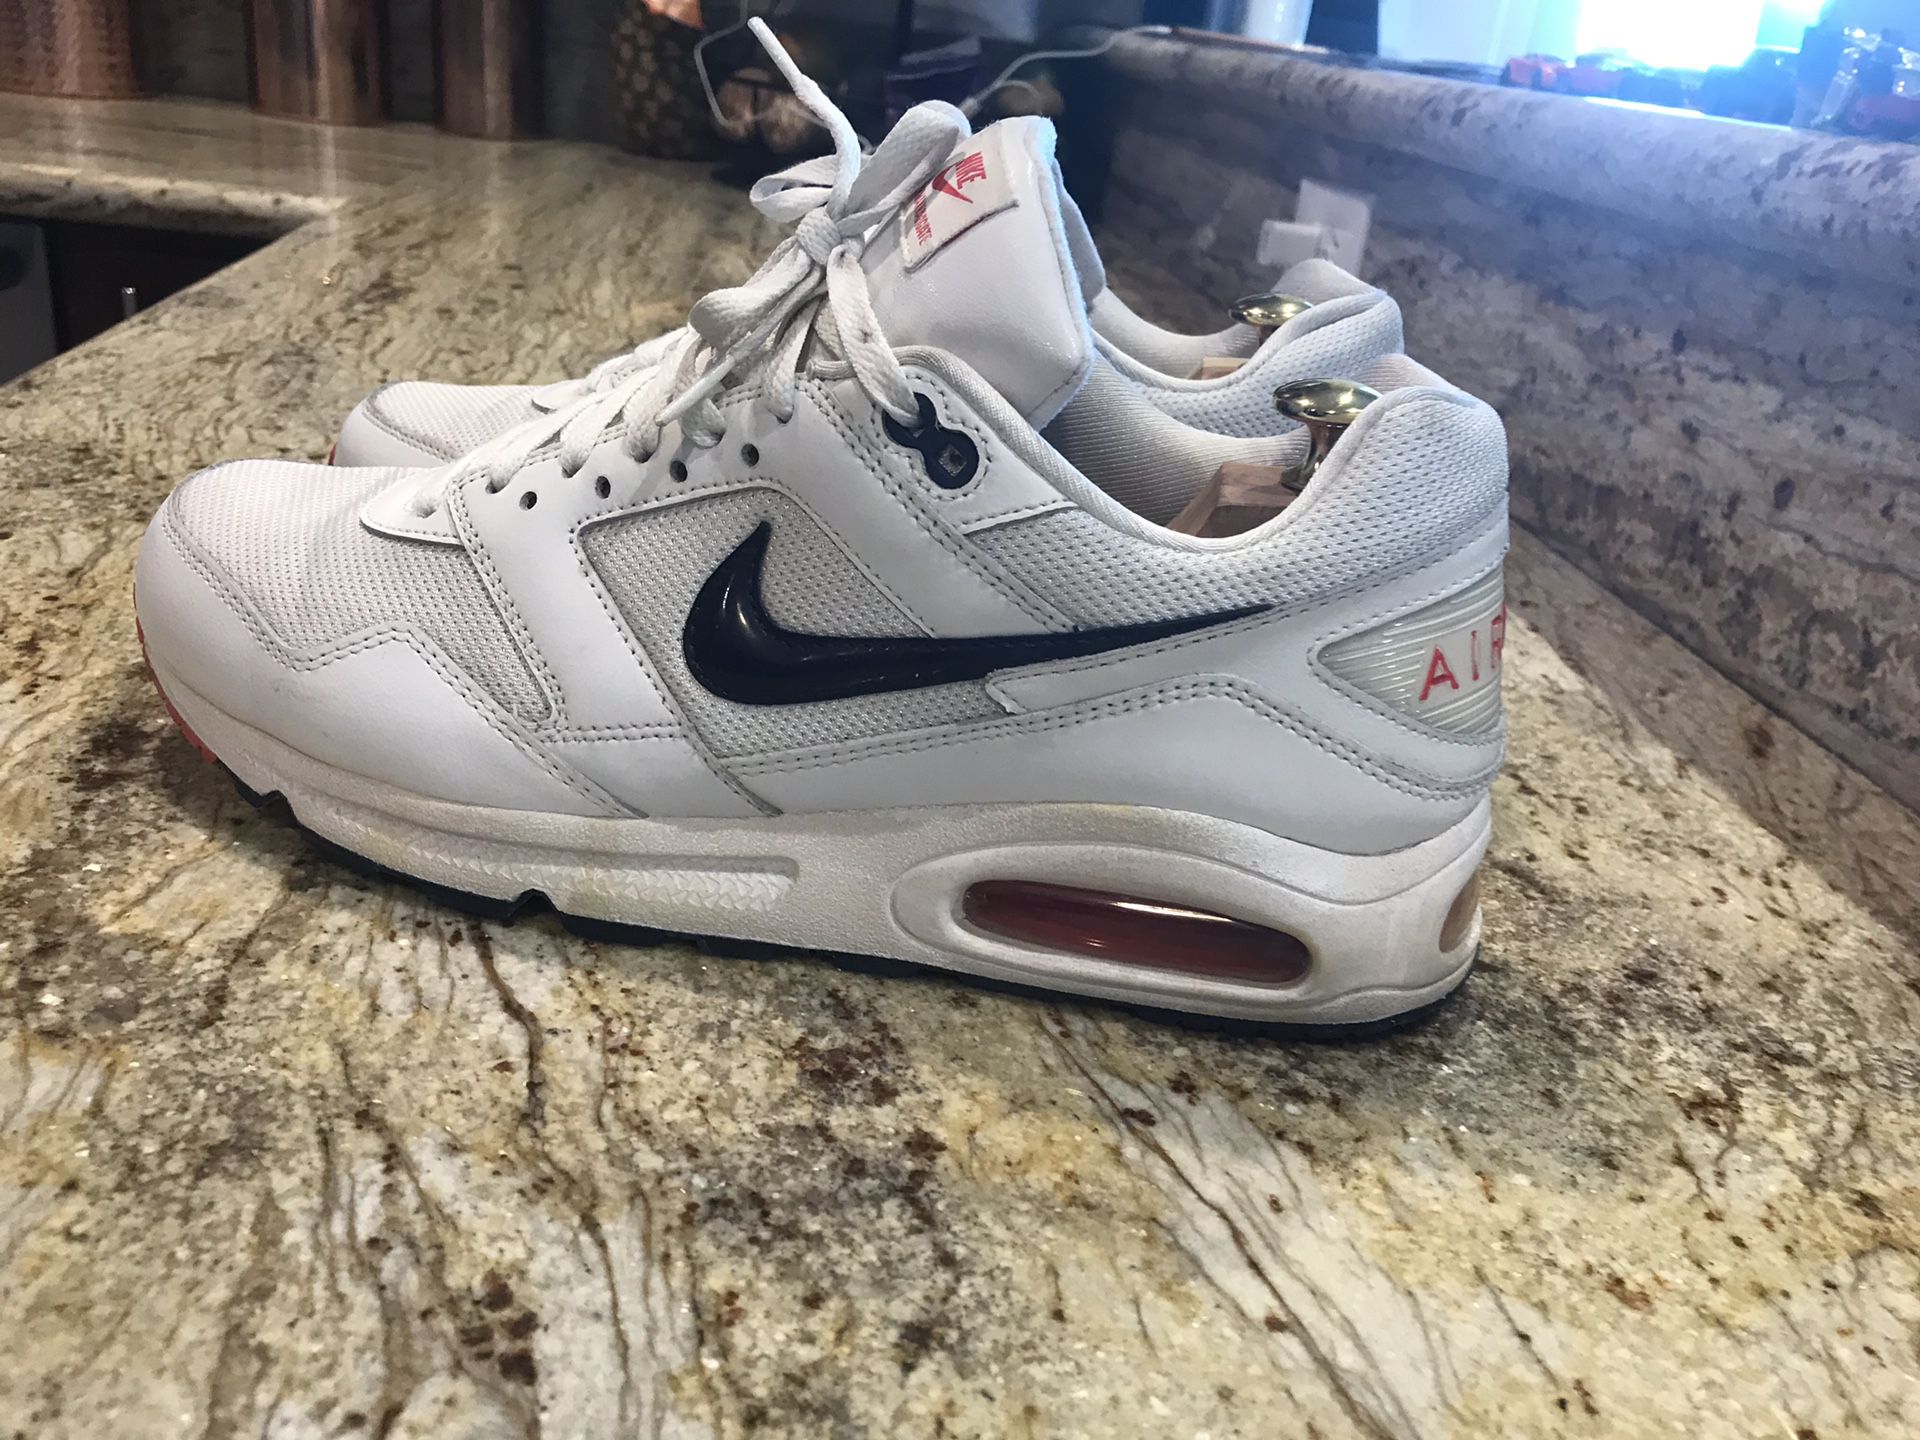 Geloofsbelijdenis Nat meer NIKE AIR MAX NAVIGATE WHITER Blue SNEAKERS ATHLETIC SHOES Size 12  #454251-103 for Sale in Spring Valley, CA - OfferUp